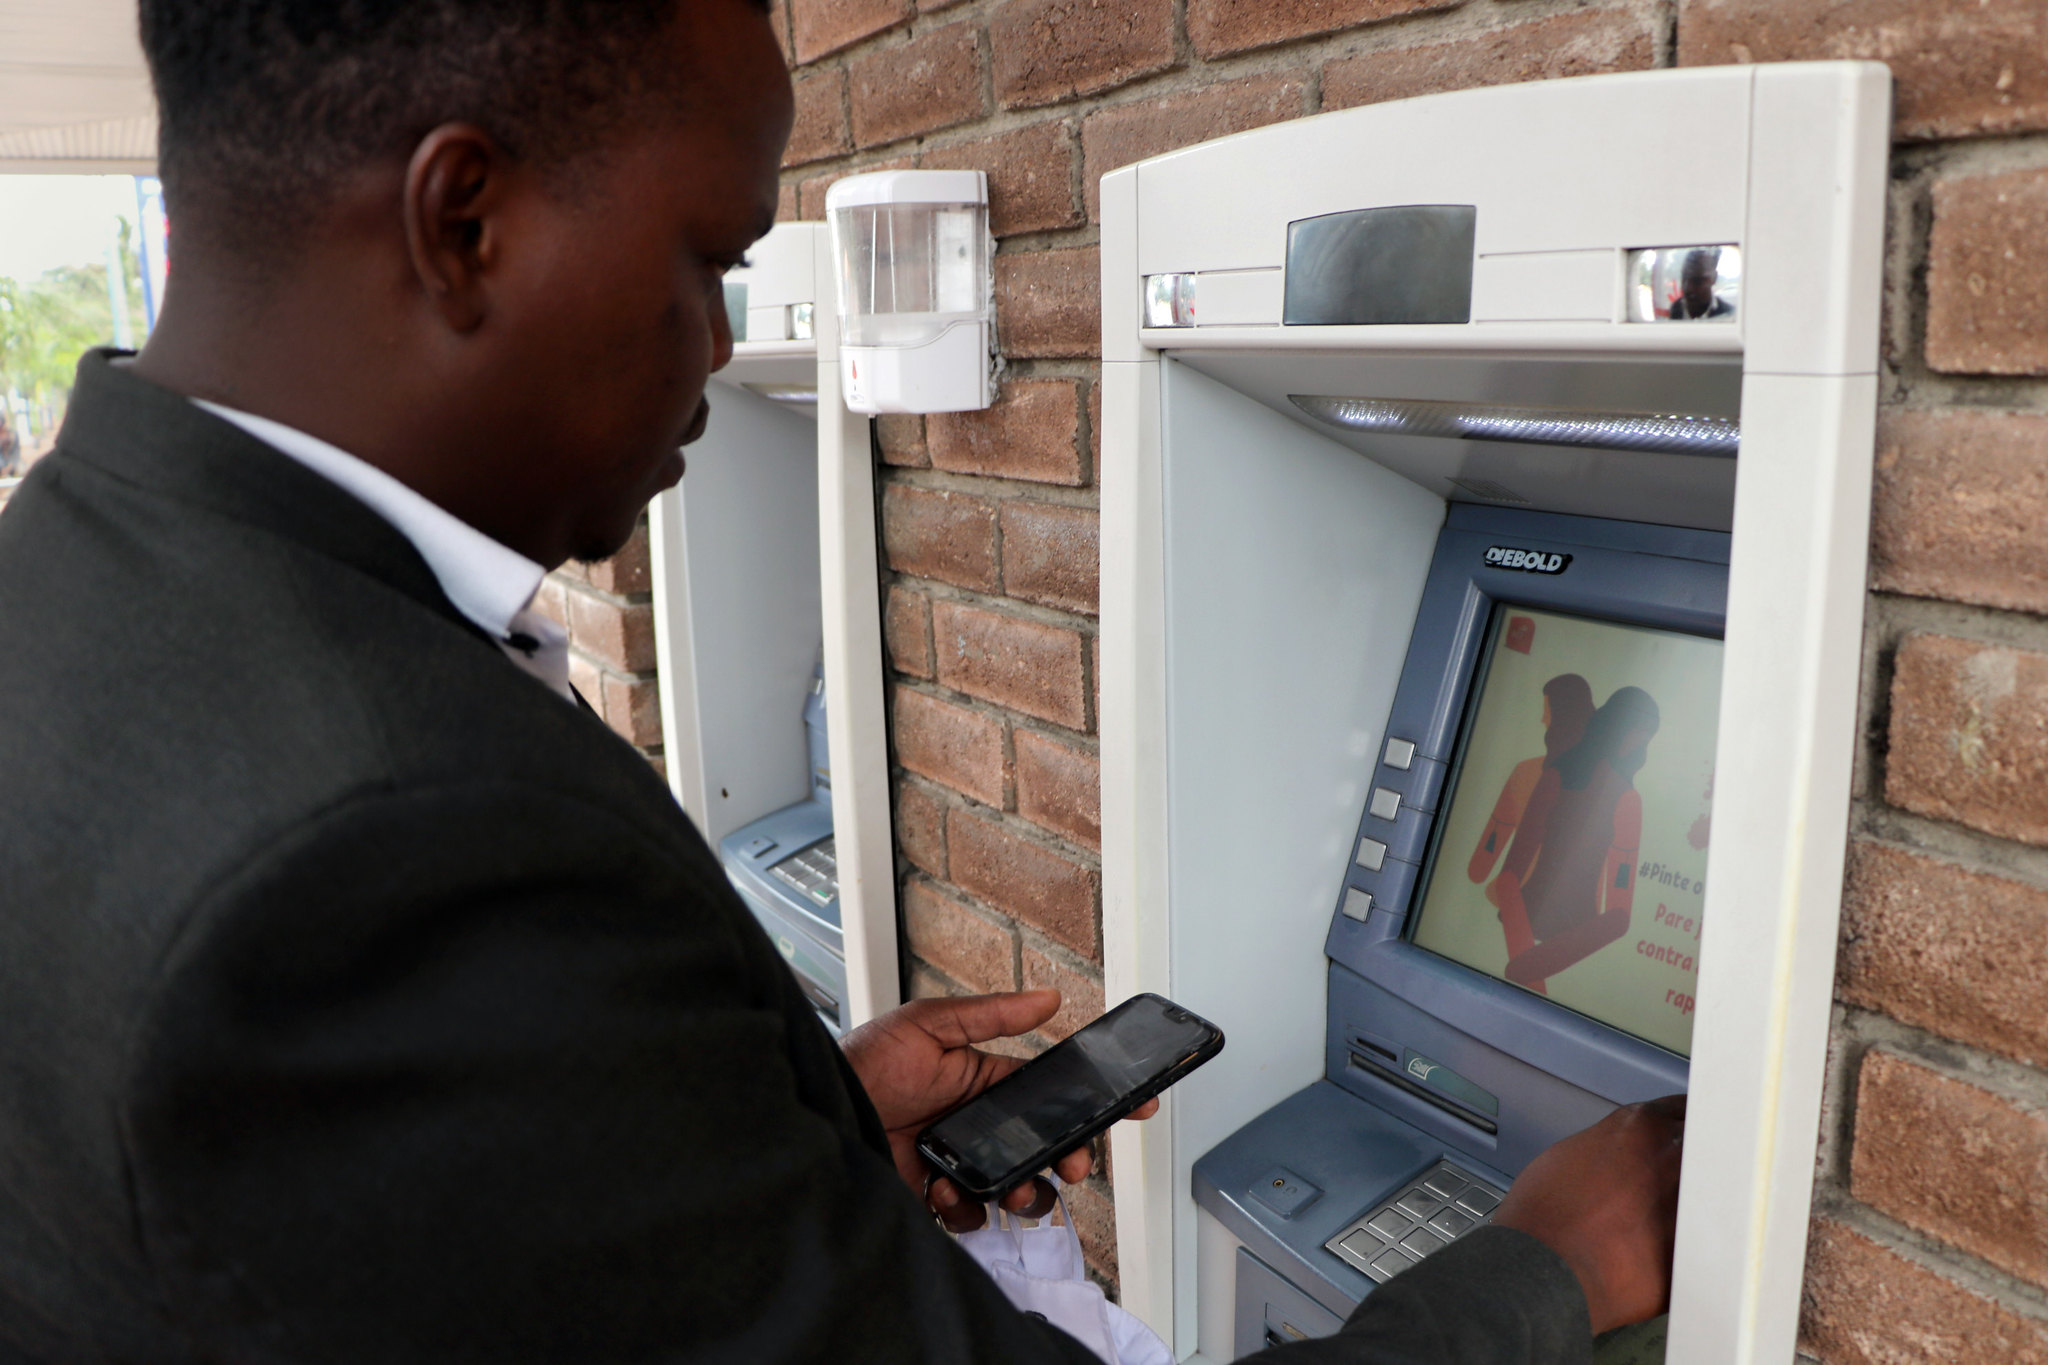 A partnership between UN Women and private bank BCI resulted in ATM machines displaying messages around the 16 Days of Activism nationwide